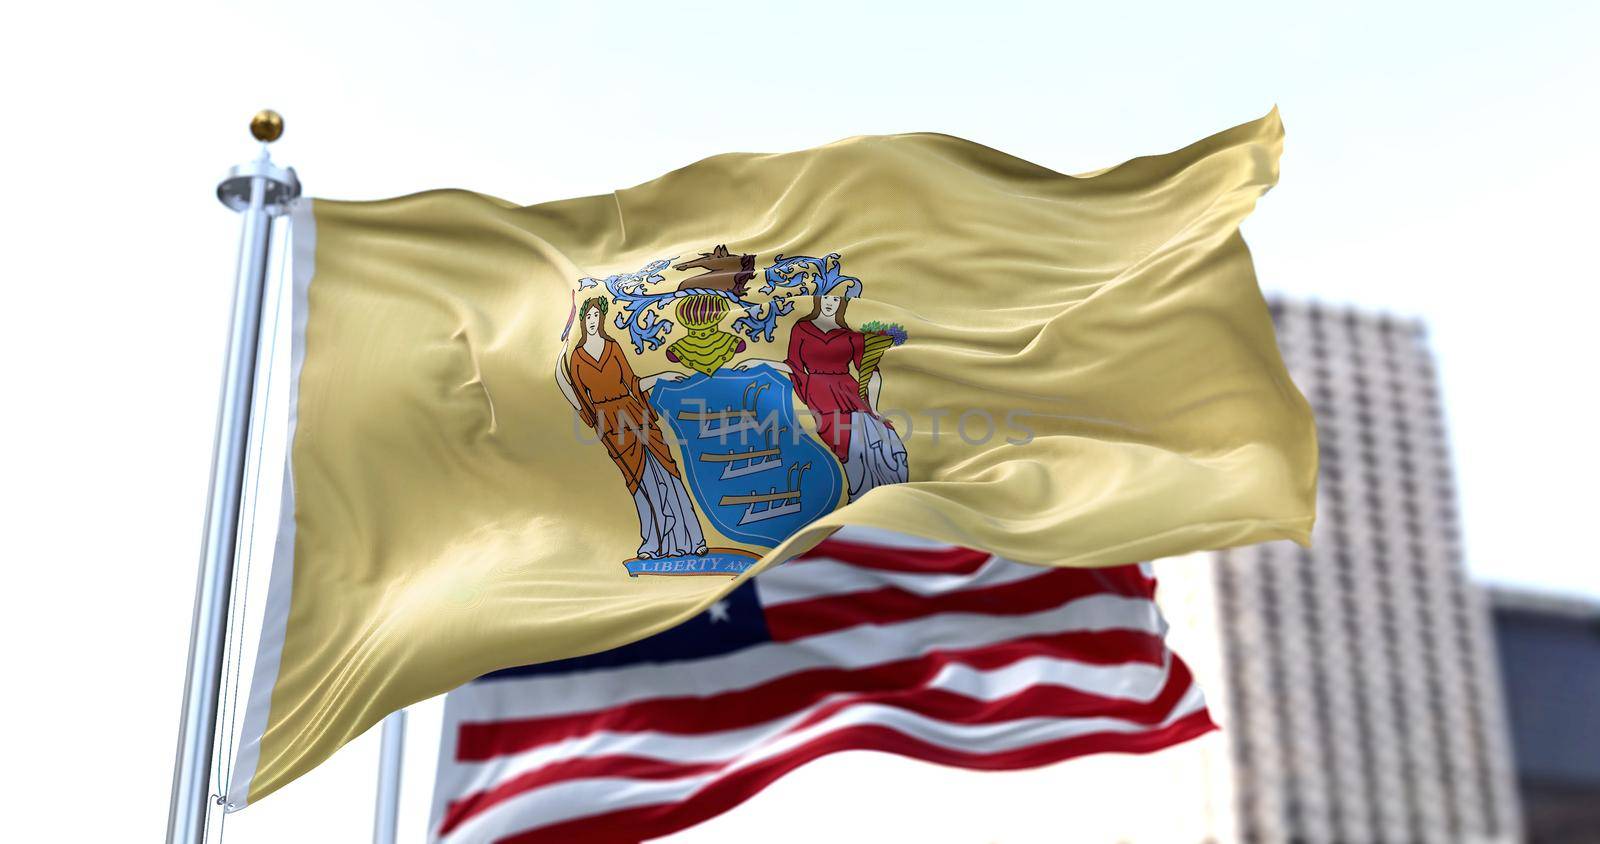 the flag of the US state of New Jersey waving in the wind with the American flag blurred in the background. New Jersey was admitted to the Union on December 18, 1787 as 3rd state